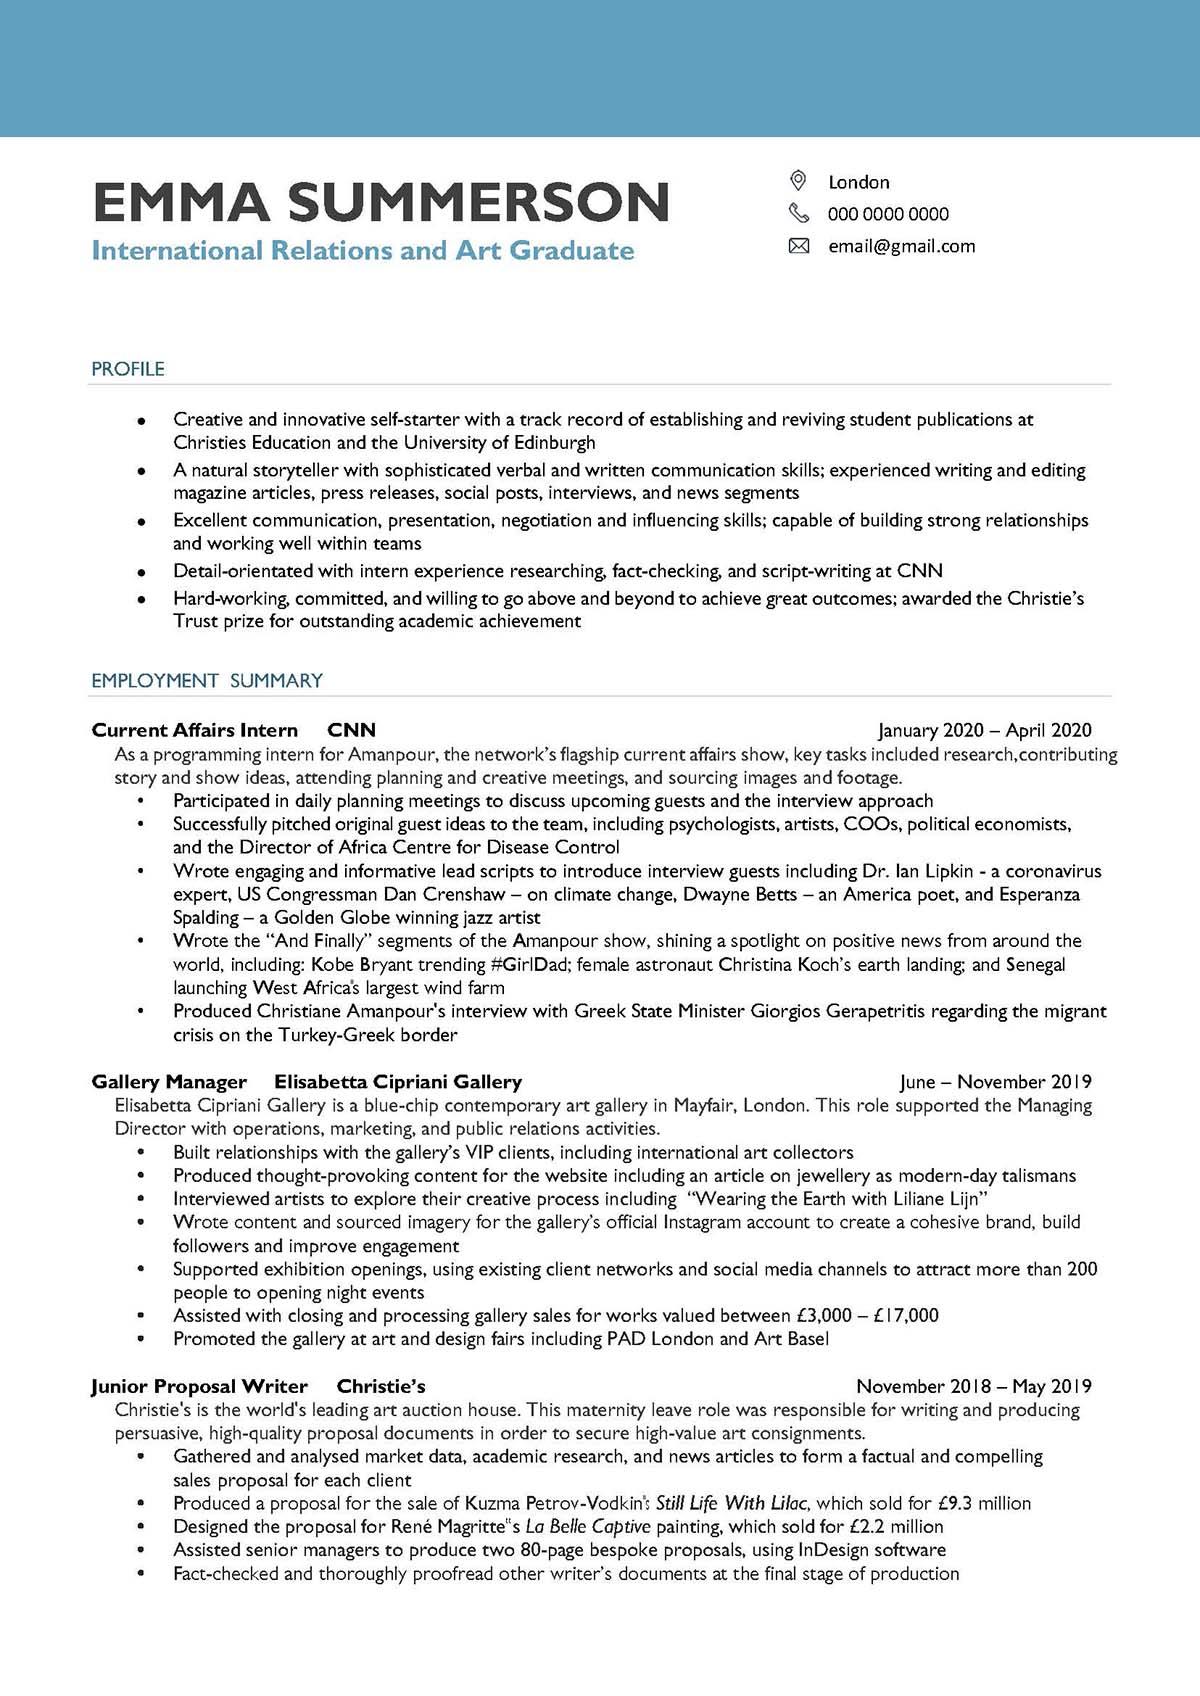 Sample resume: Foreign Studies, Low Experience, Chronological